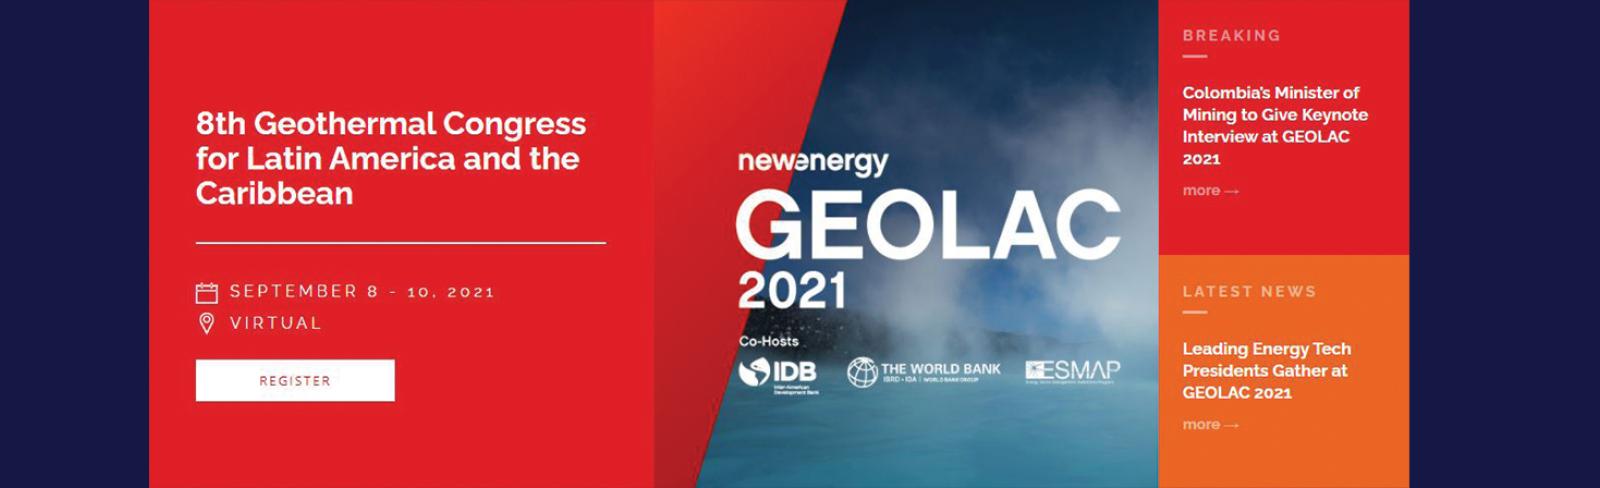 8th Geothermal Congress for Latin American and the Caribbean (GEOLAC)